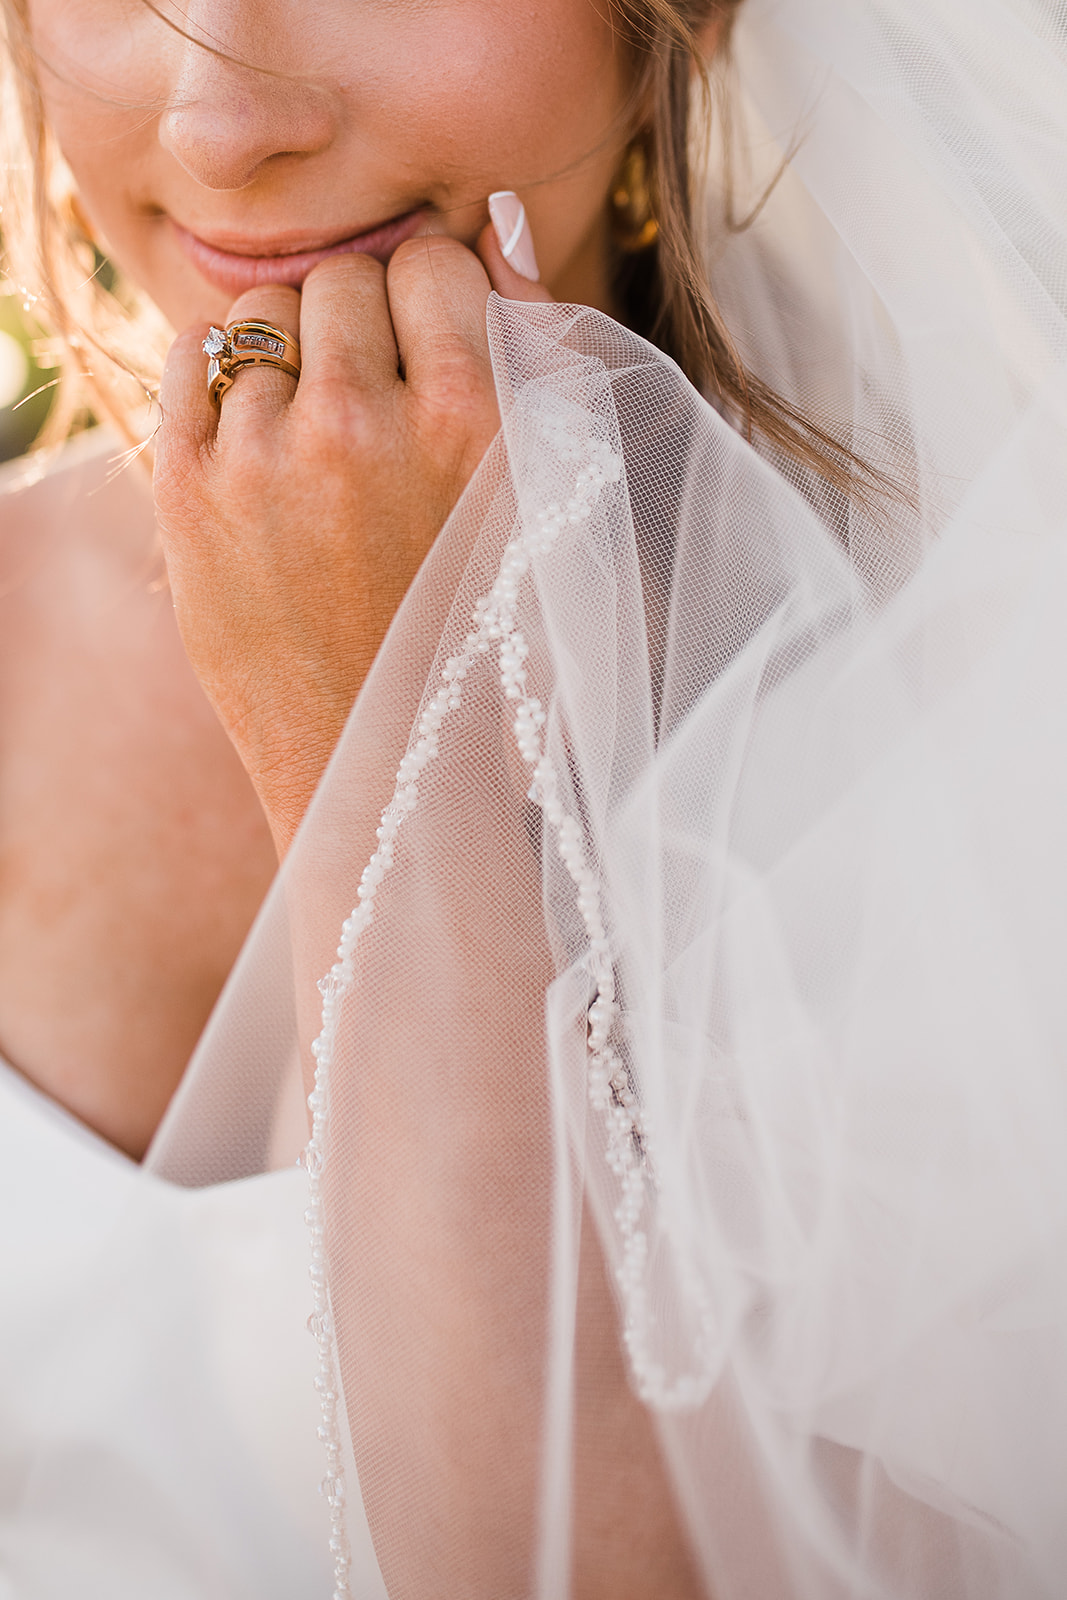 Details of a bride holding her veil up to her chin at sunset